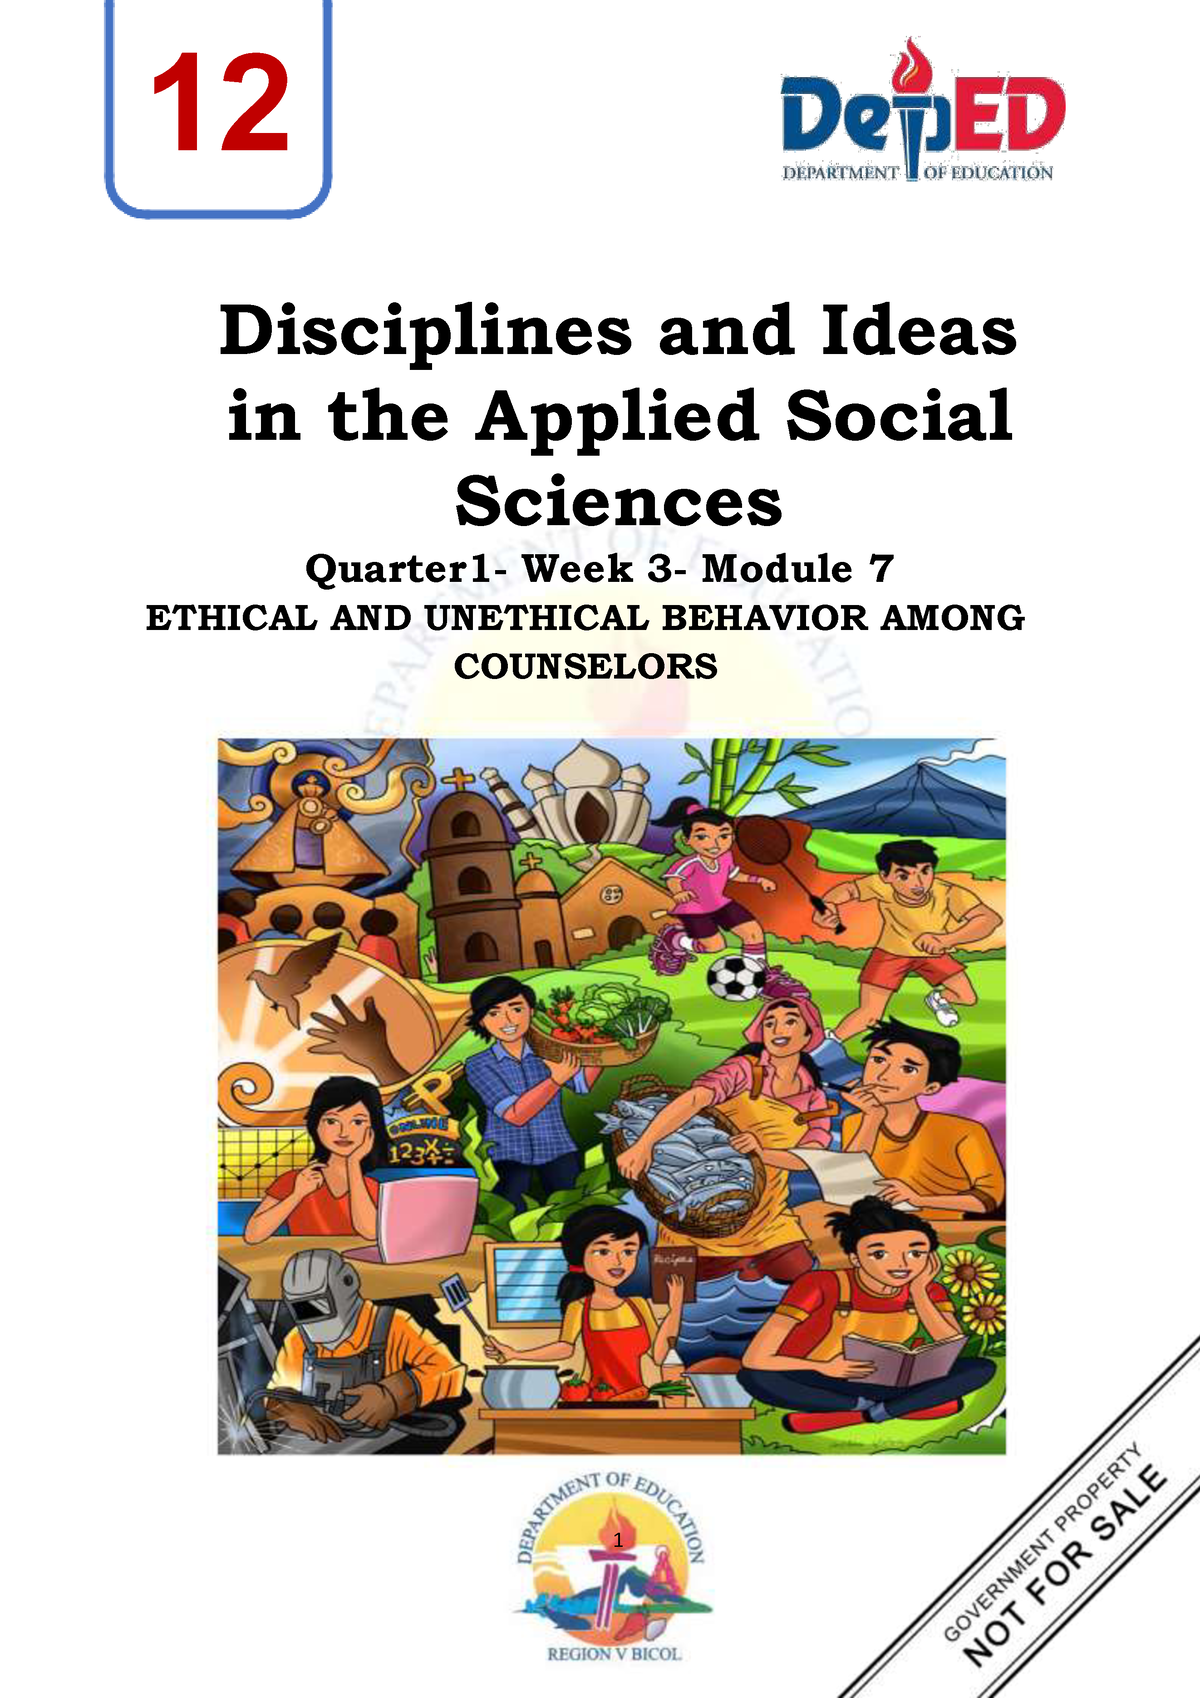 Disciplines And Ideas In The Applied Social Sciences Q1 Module 7 12 Disciplines And Ideas In